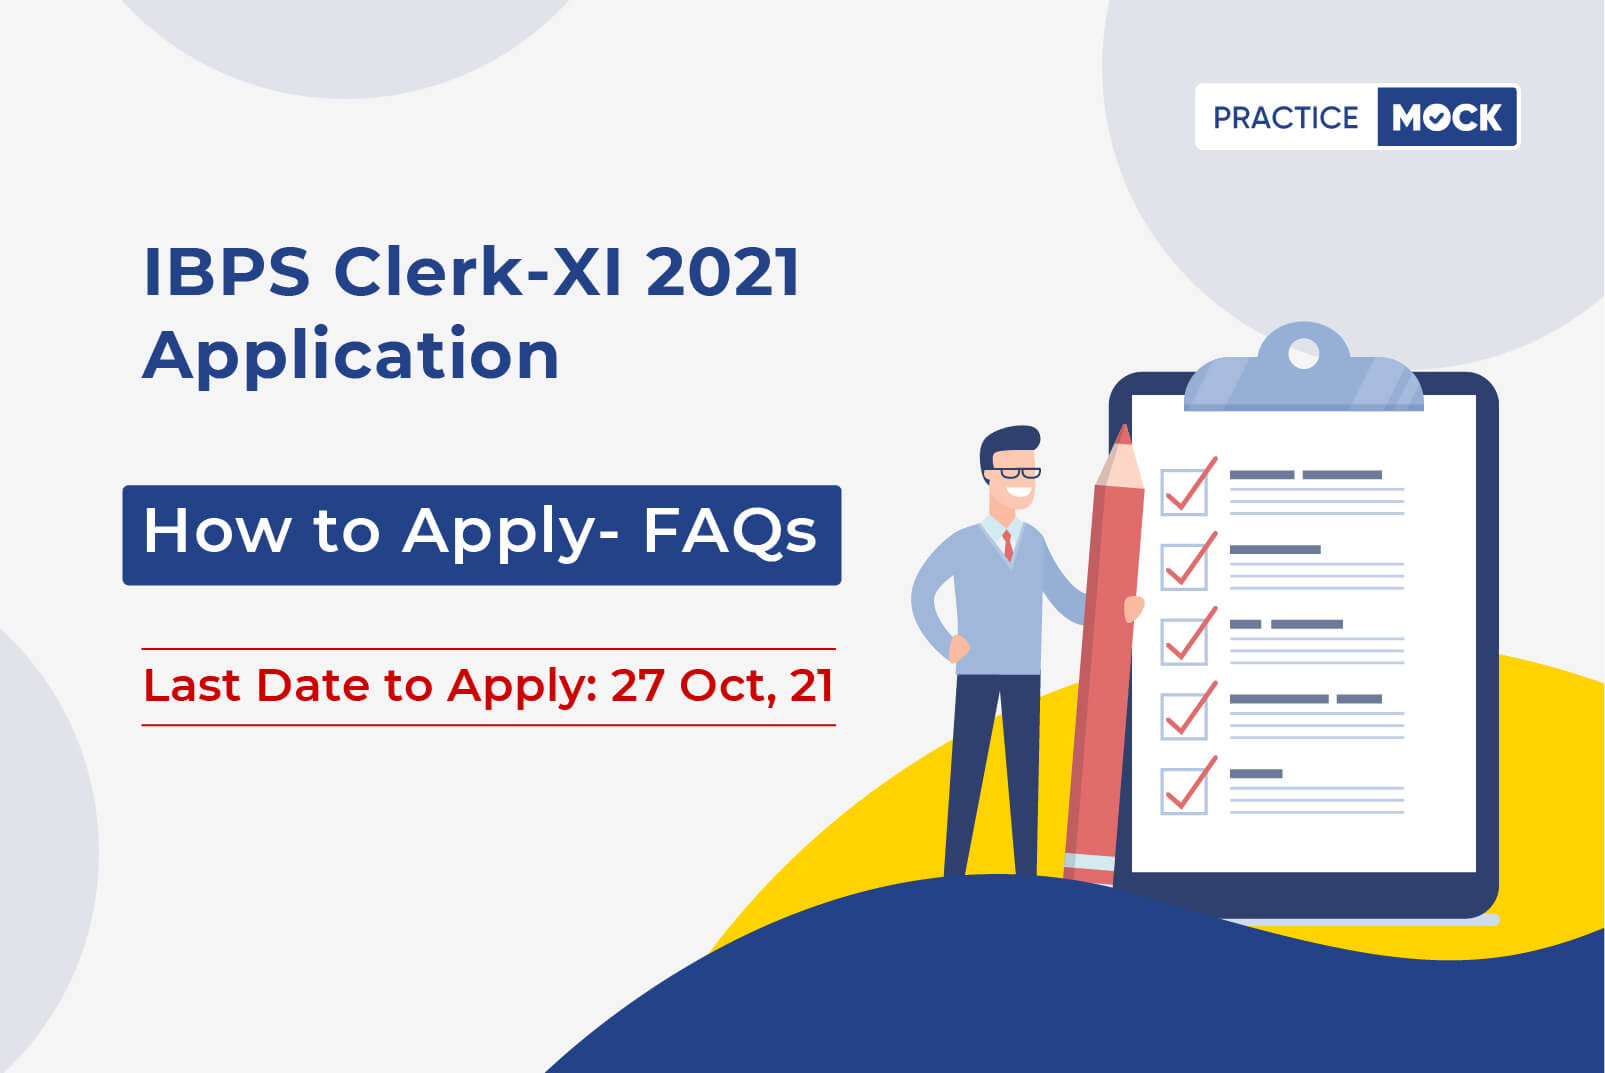 IBPS Clerk-XI 2021 Application- How to Apply- FAQs